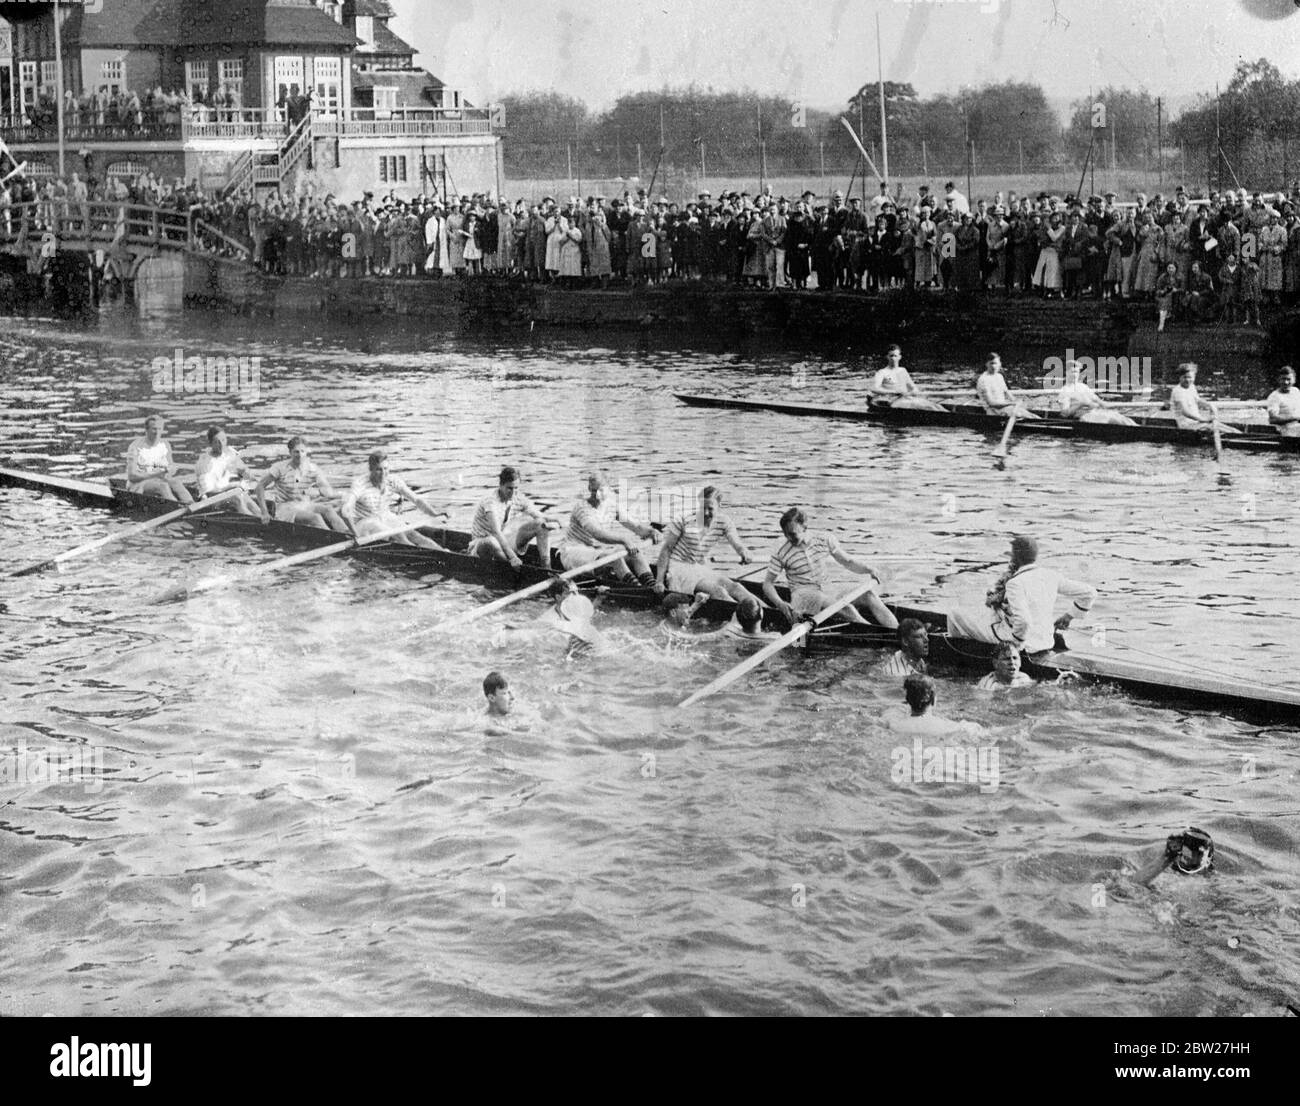 Supporters of the New College crew swam out to the oarsemen with beer after the crew had emerged Head of the River from the Oxford Summer Eights. New College wrested the headship from Oriel, who had held it for the record time of four years. 27 May 1937 Stock Photo